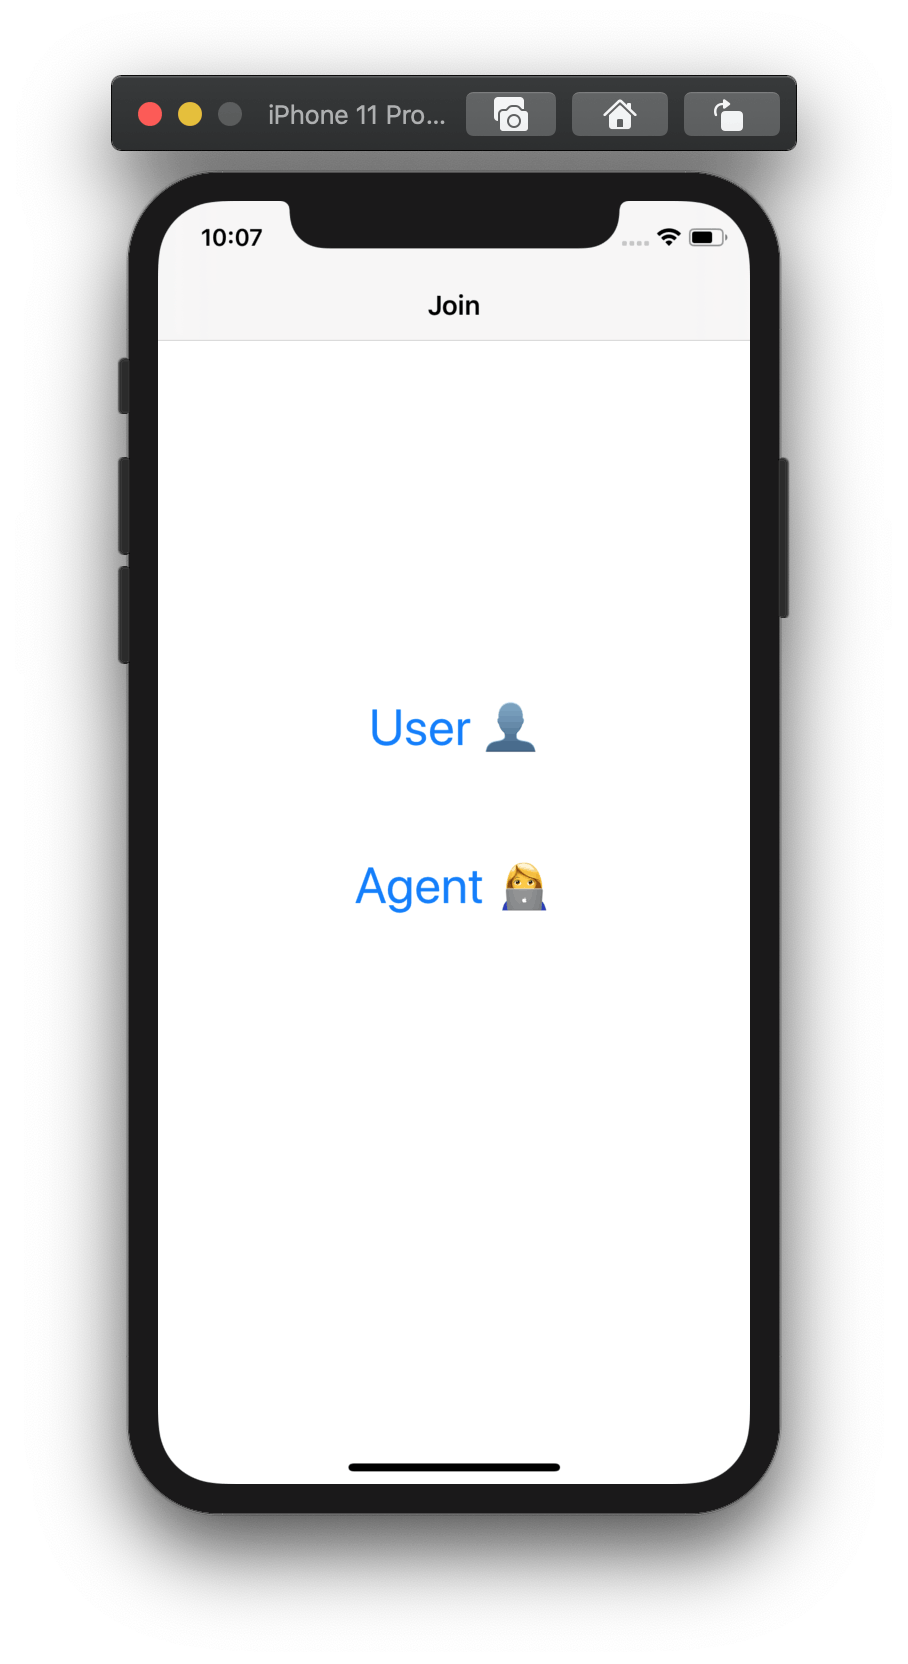 Screenshot shows an app with two buttons, one to join as a user, and the other to join as the agent